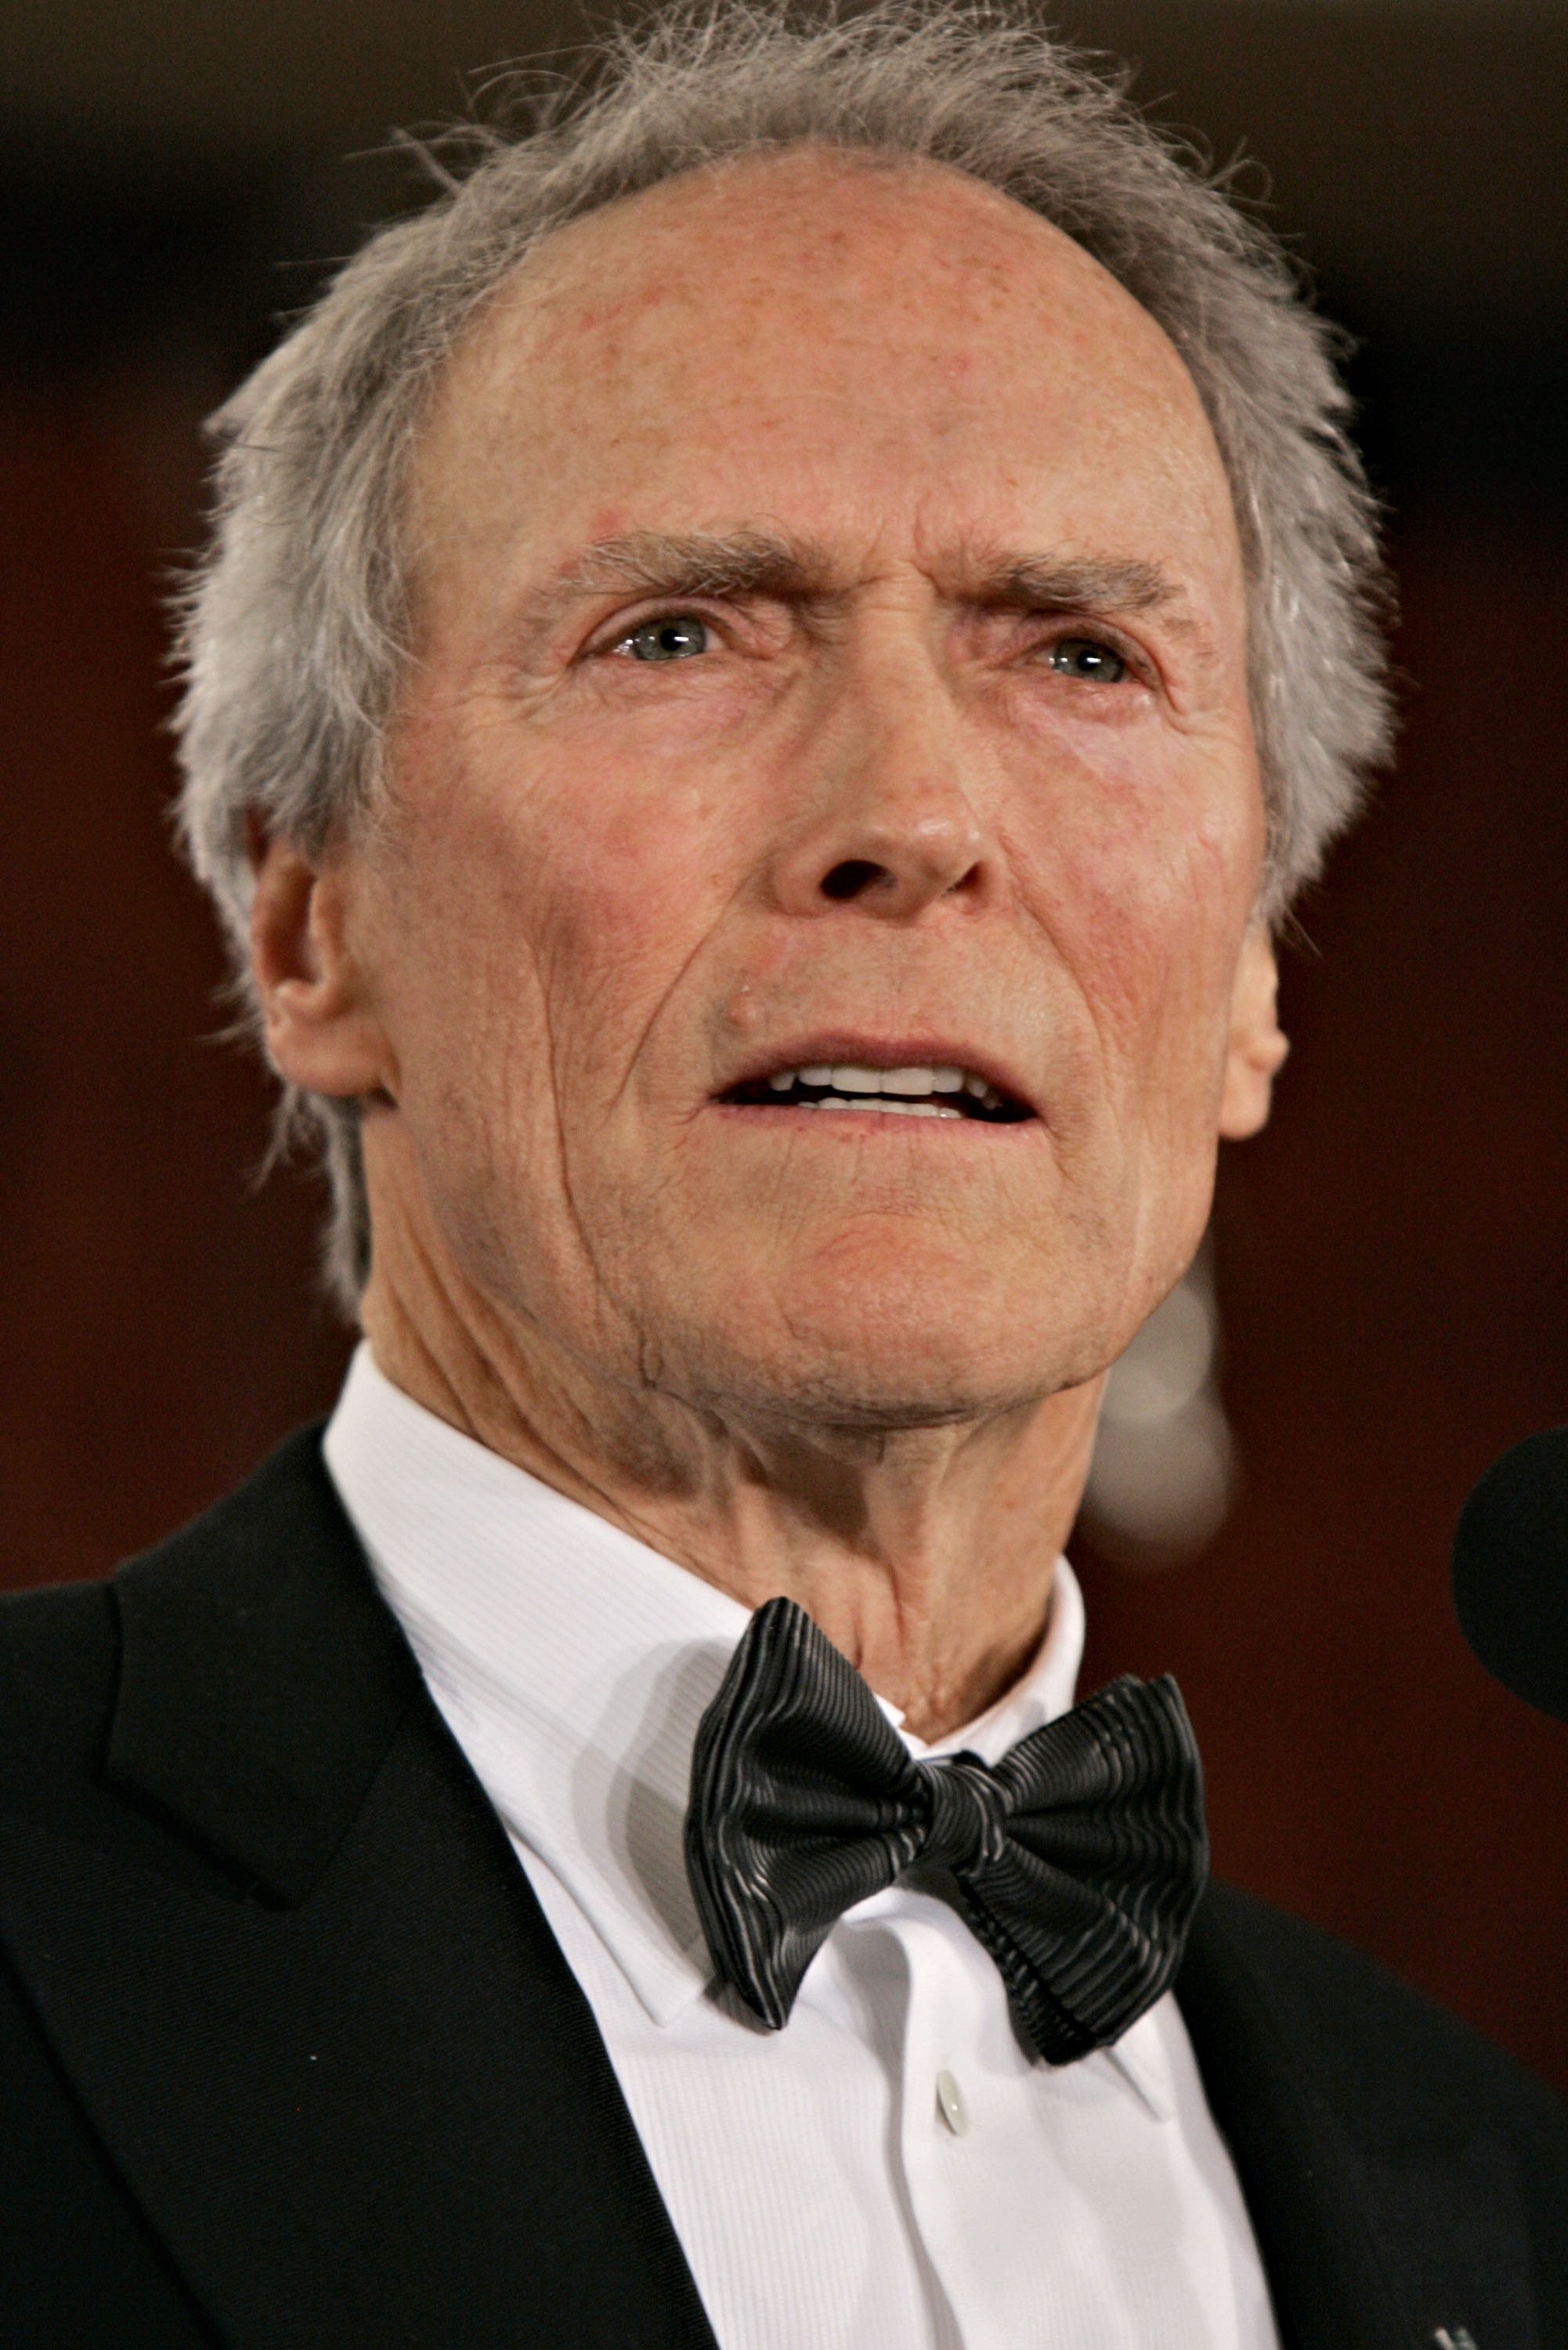 Director Clint Eastwood speaks after accepting his Lifetime Achievement Award in the press room during the 58th Annual Directors Guild Of America Awards at Hyatt Regency Century Plaza on January 28, 2006 in Los Angeles, California | Photo: Getty Images